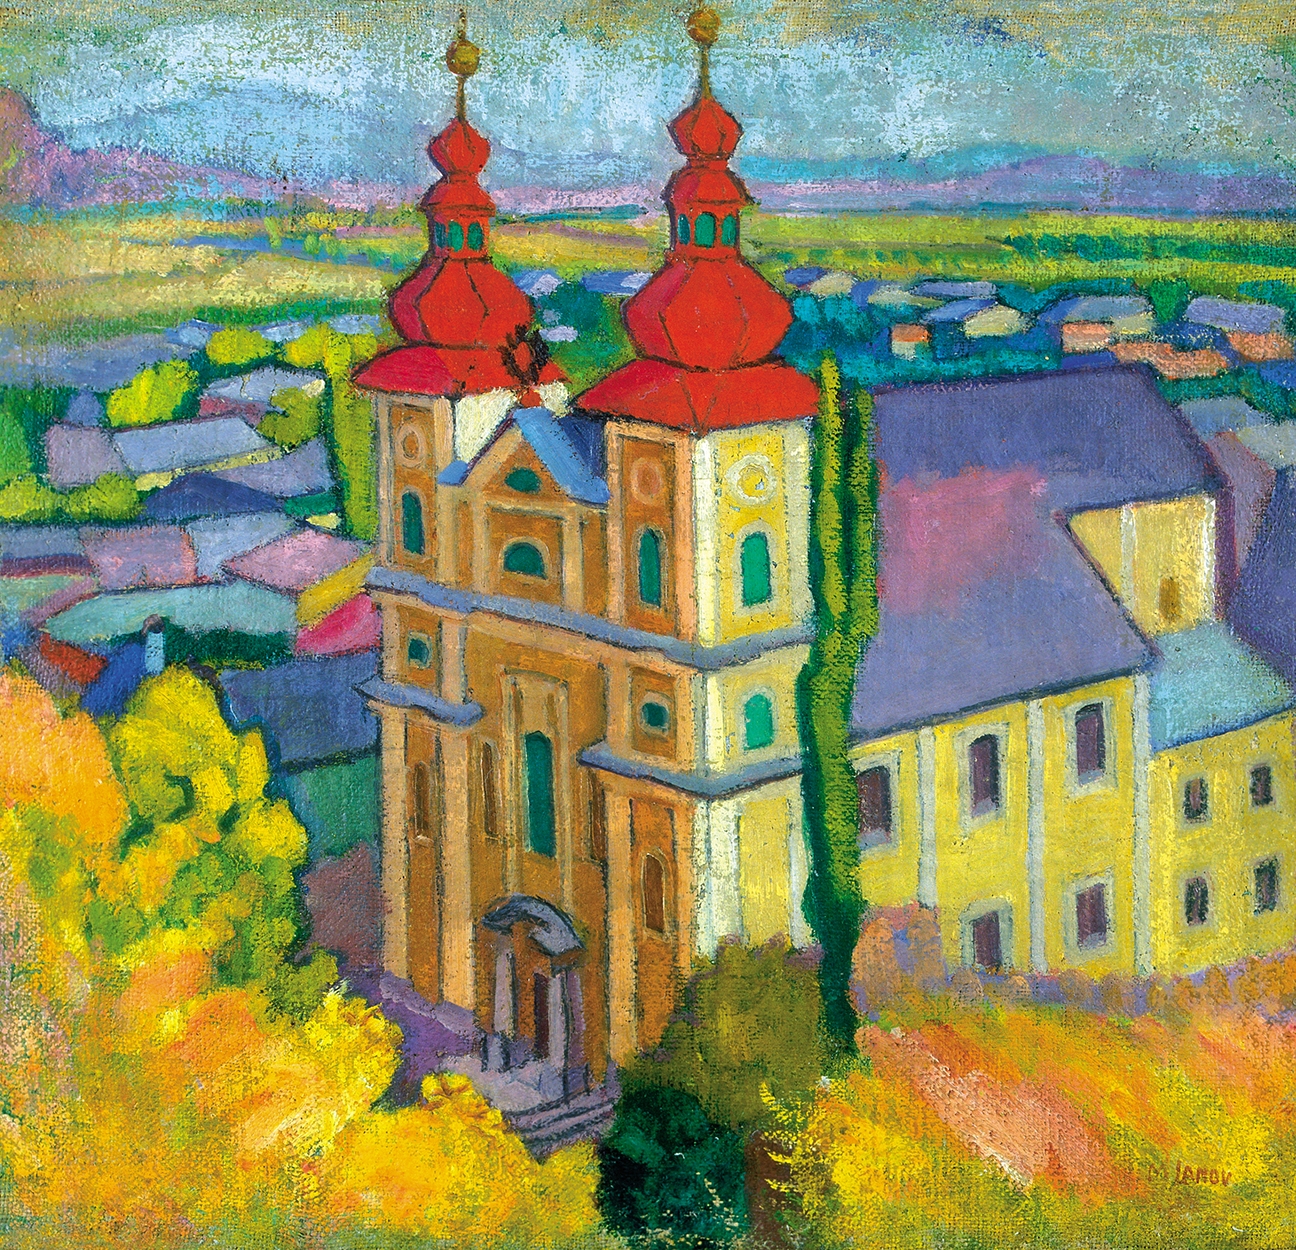 Lanow Mária (1880-1951) View from the István Tower, 1908